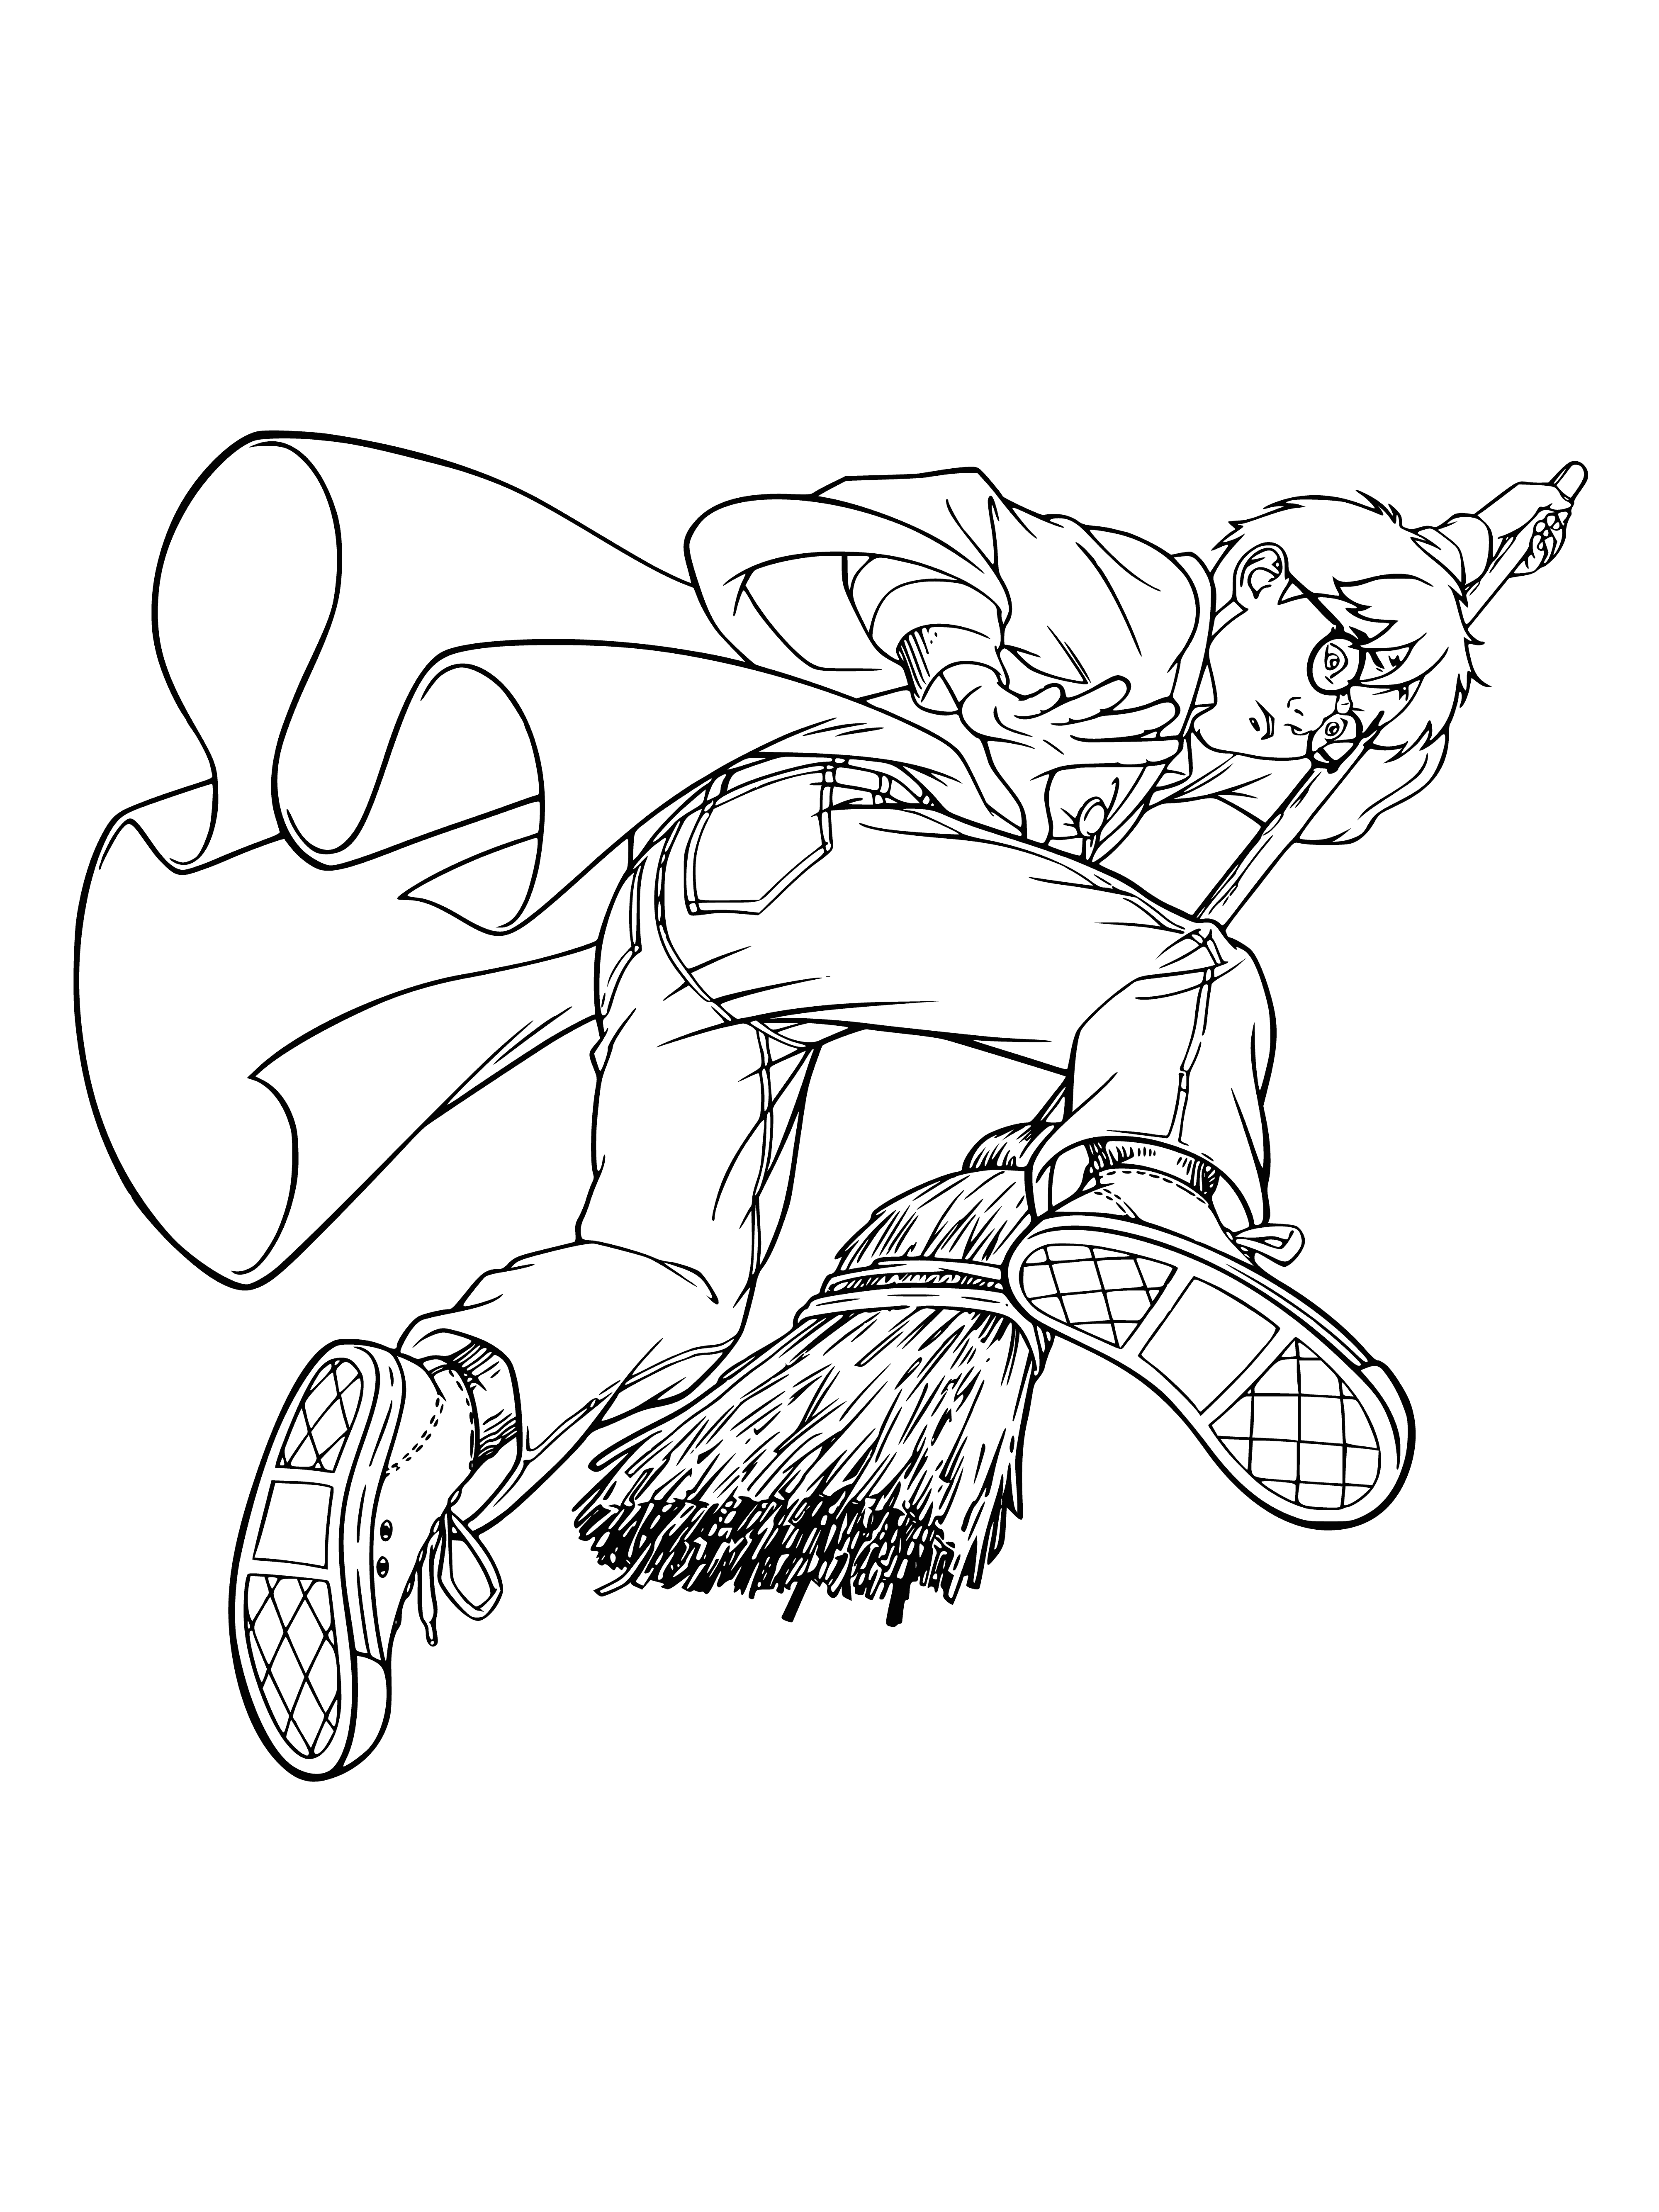 Harry falls off his broom coloring page